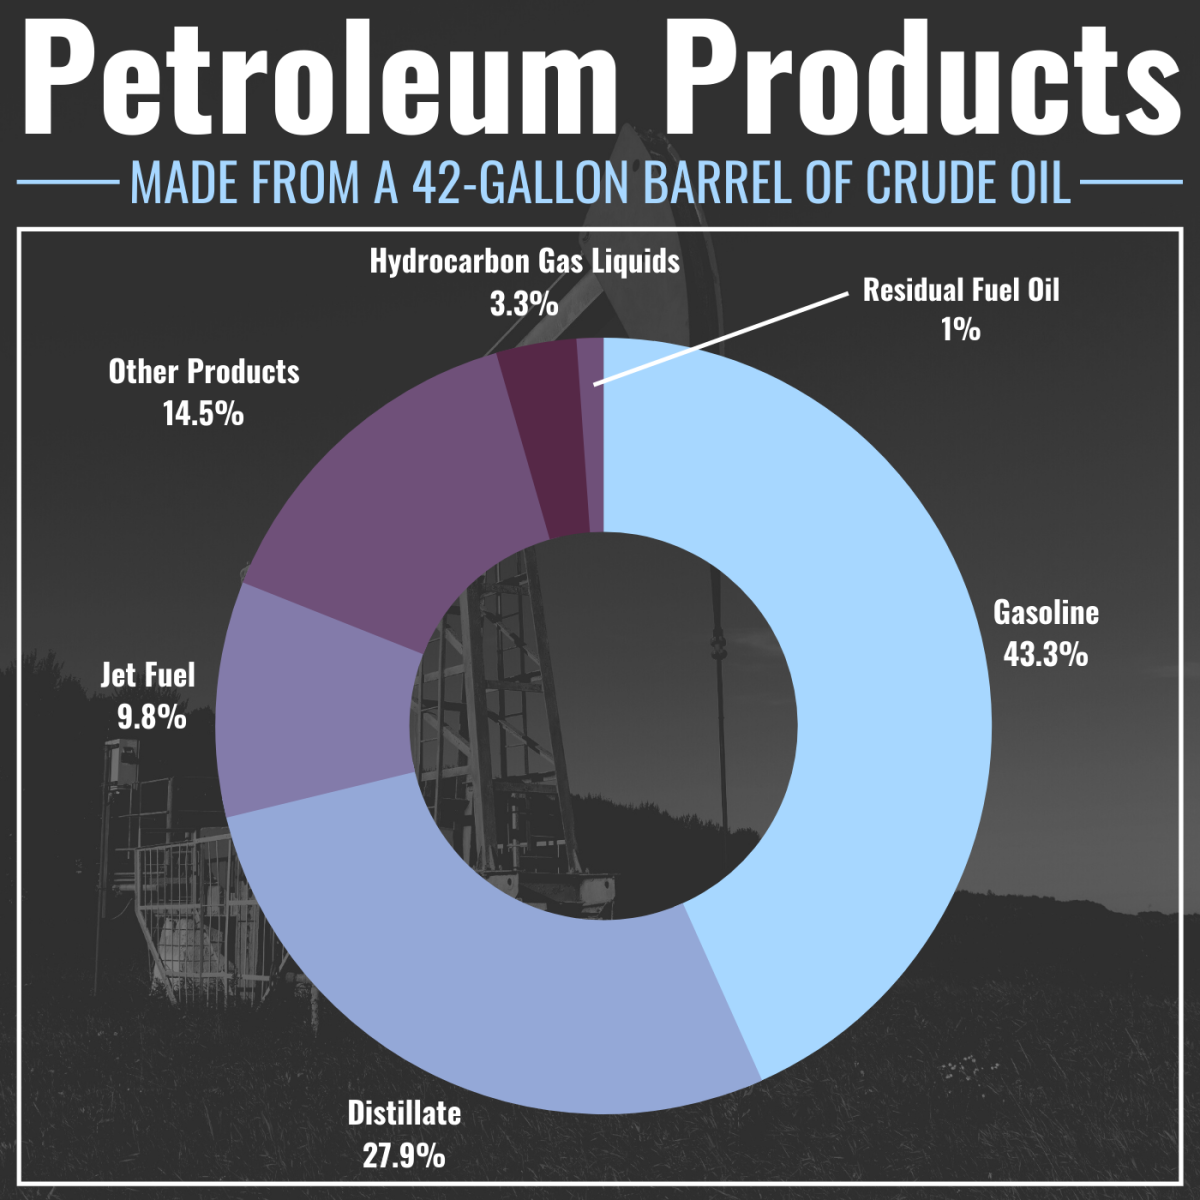 A 42-gallon barrel of crude oil can yield 45 gallons of petroleum products due to gains during the refining process.